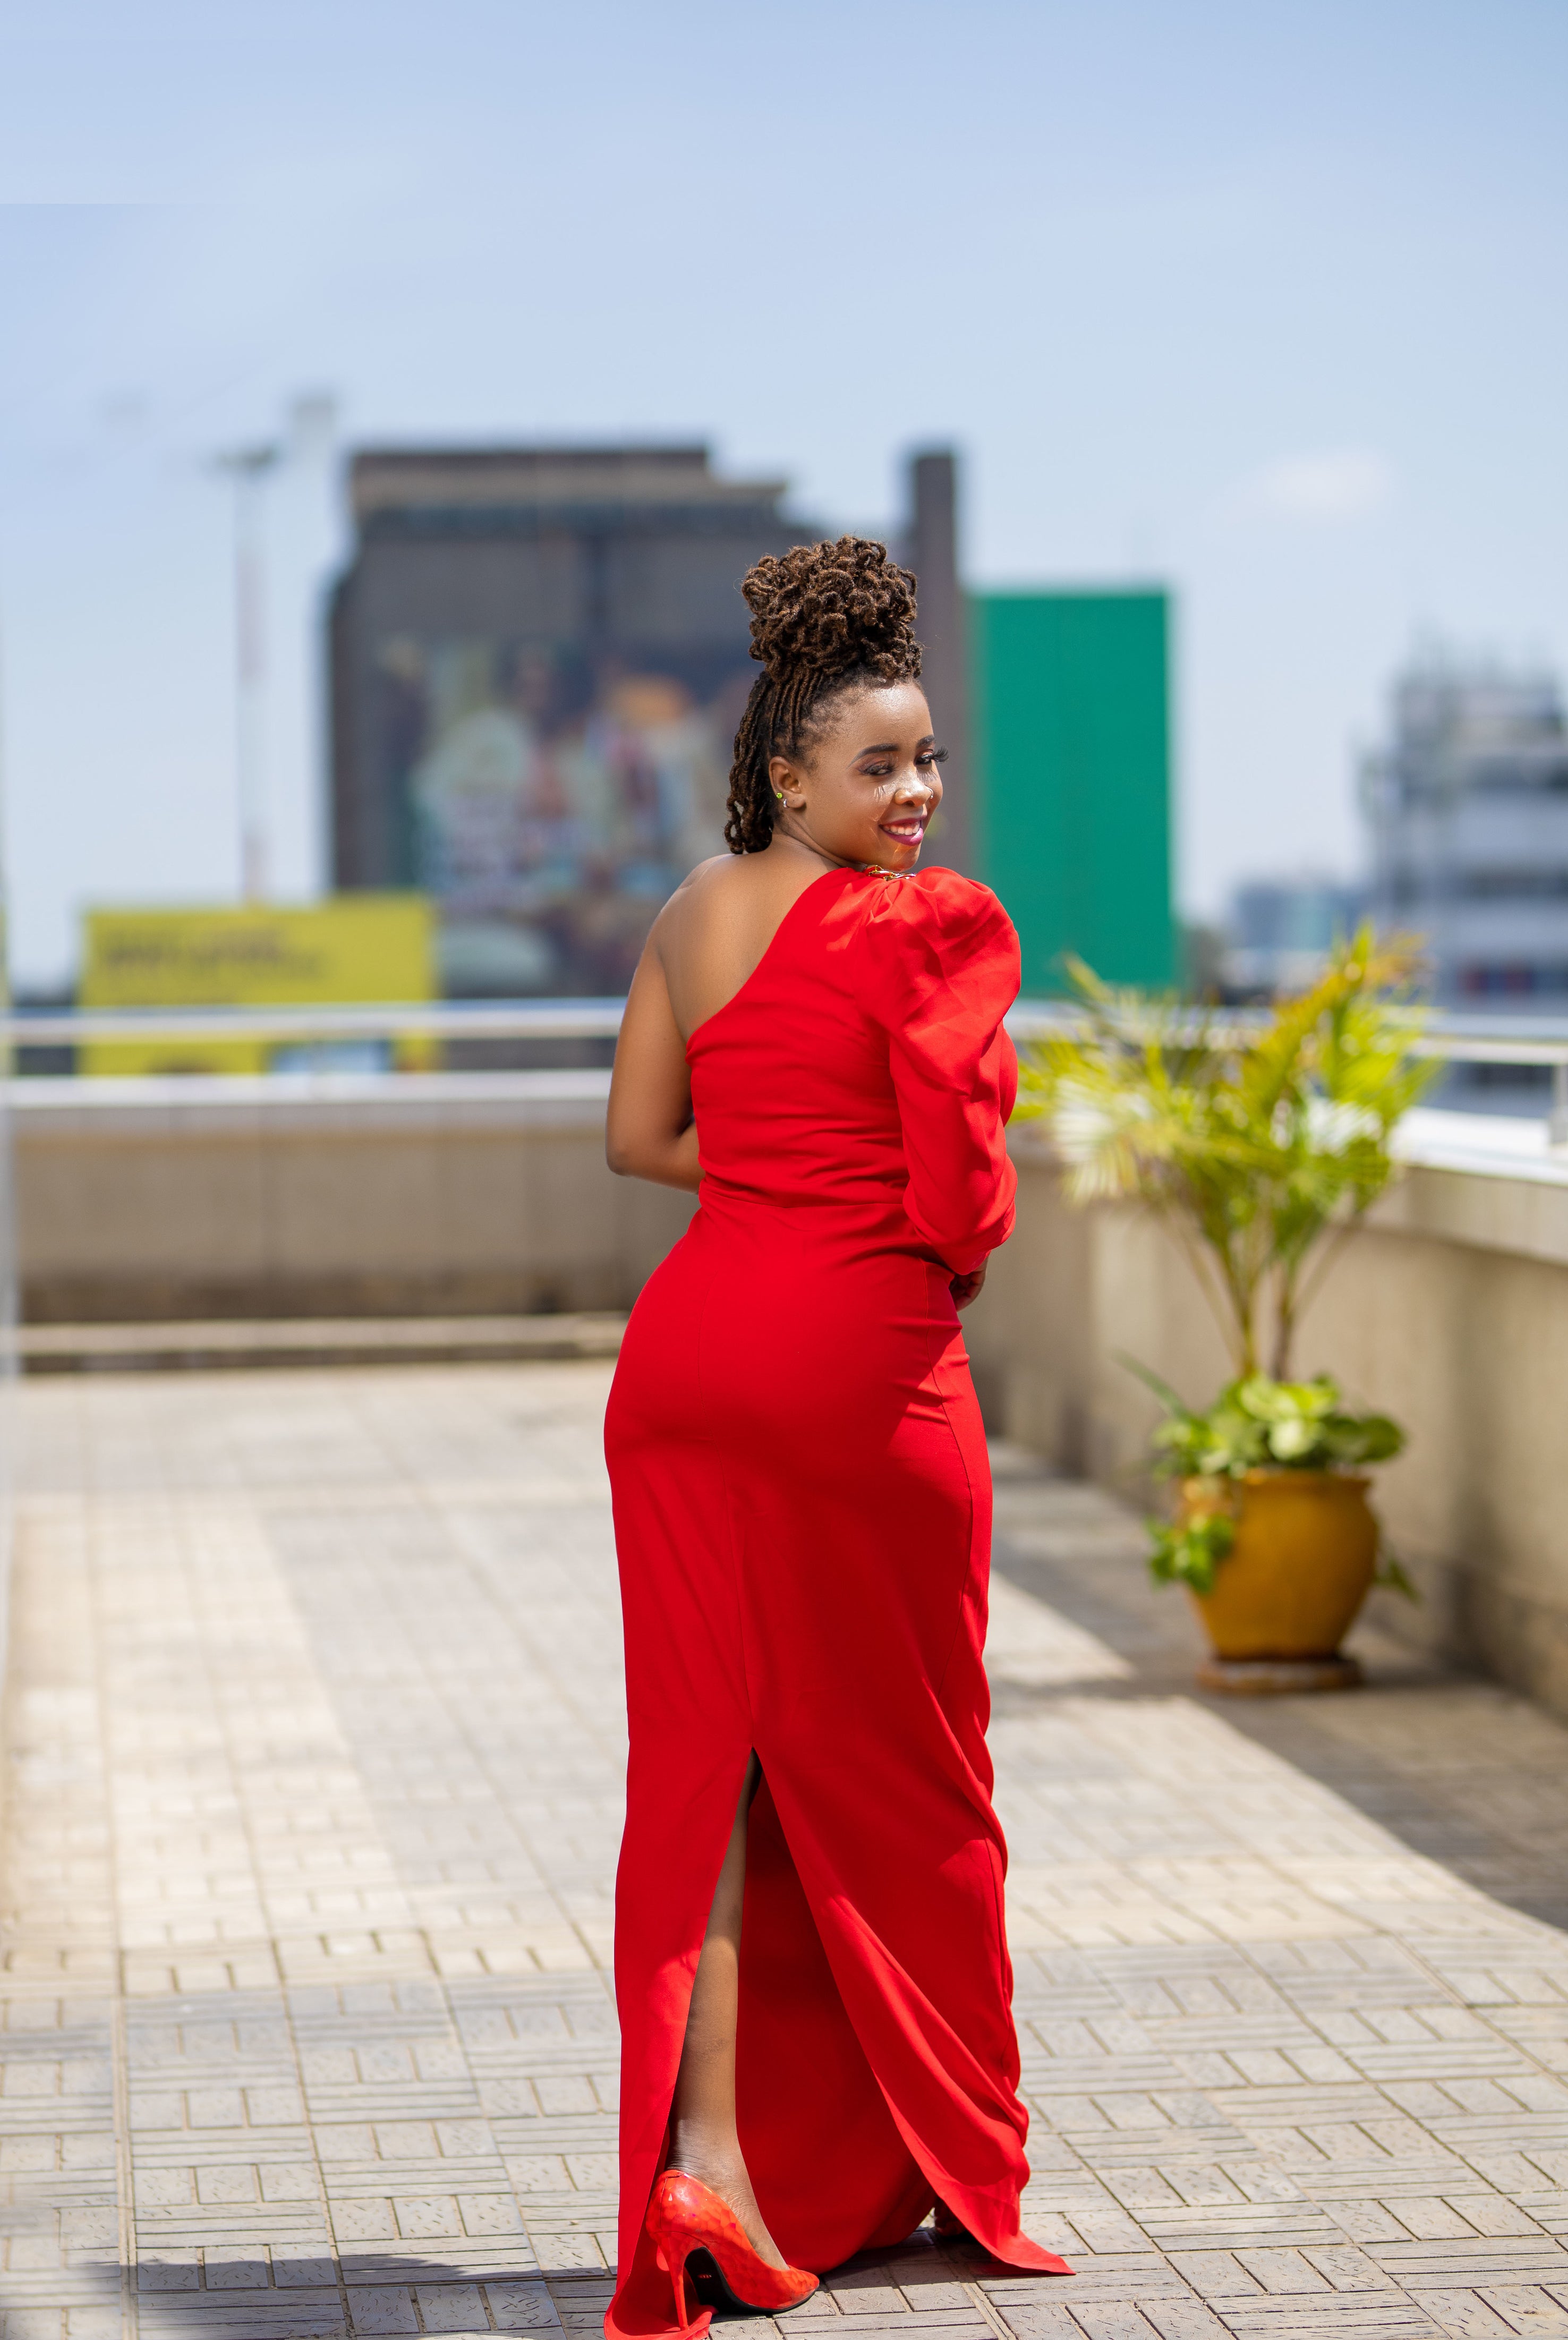 Quest Gown - Shop Kenya - Affordable Fashion Quest Gown hiiii_style Gown quest-gown chelsea_okwako93, Fervente One Hand Chain Gown Shop Kenya - Affordable Fashion